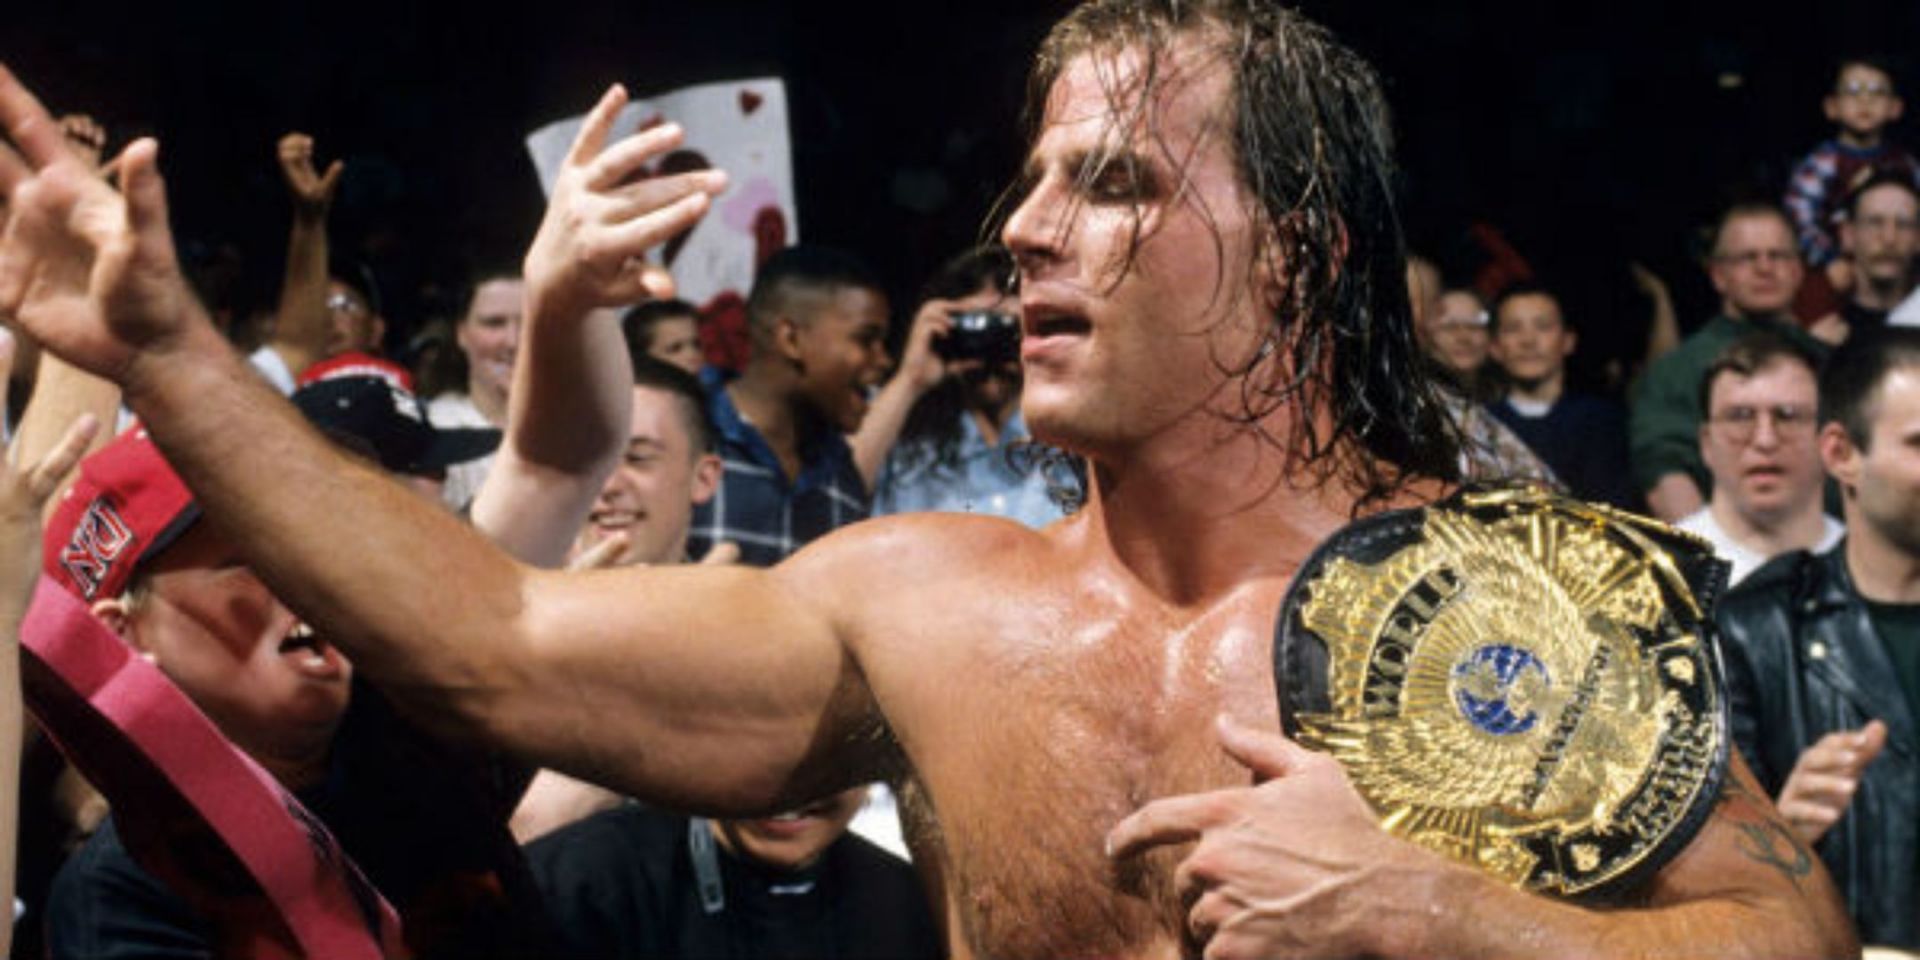 HBK is a two-time WWE Hall of Famer